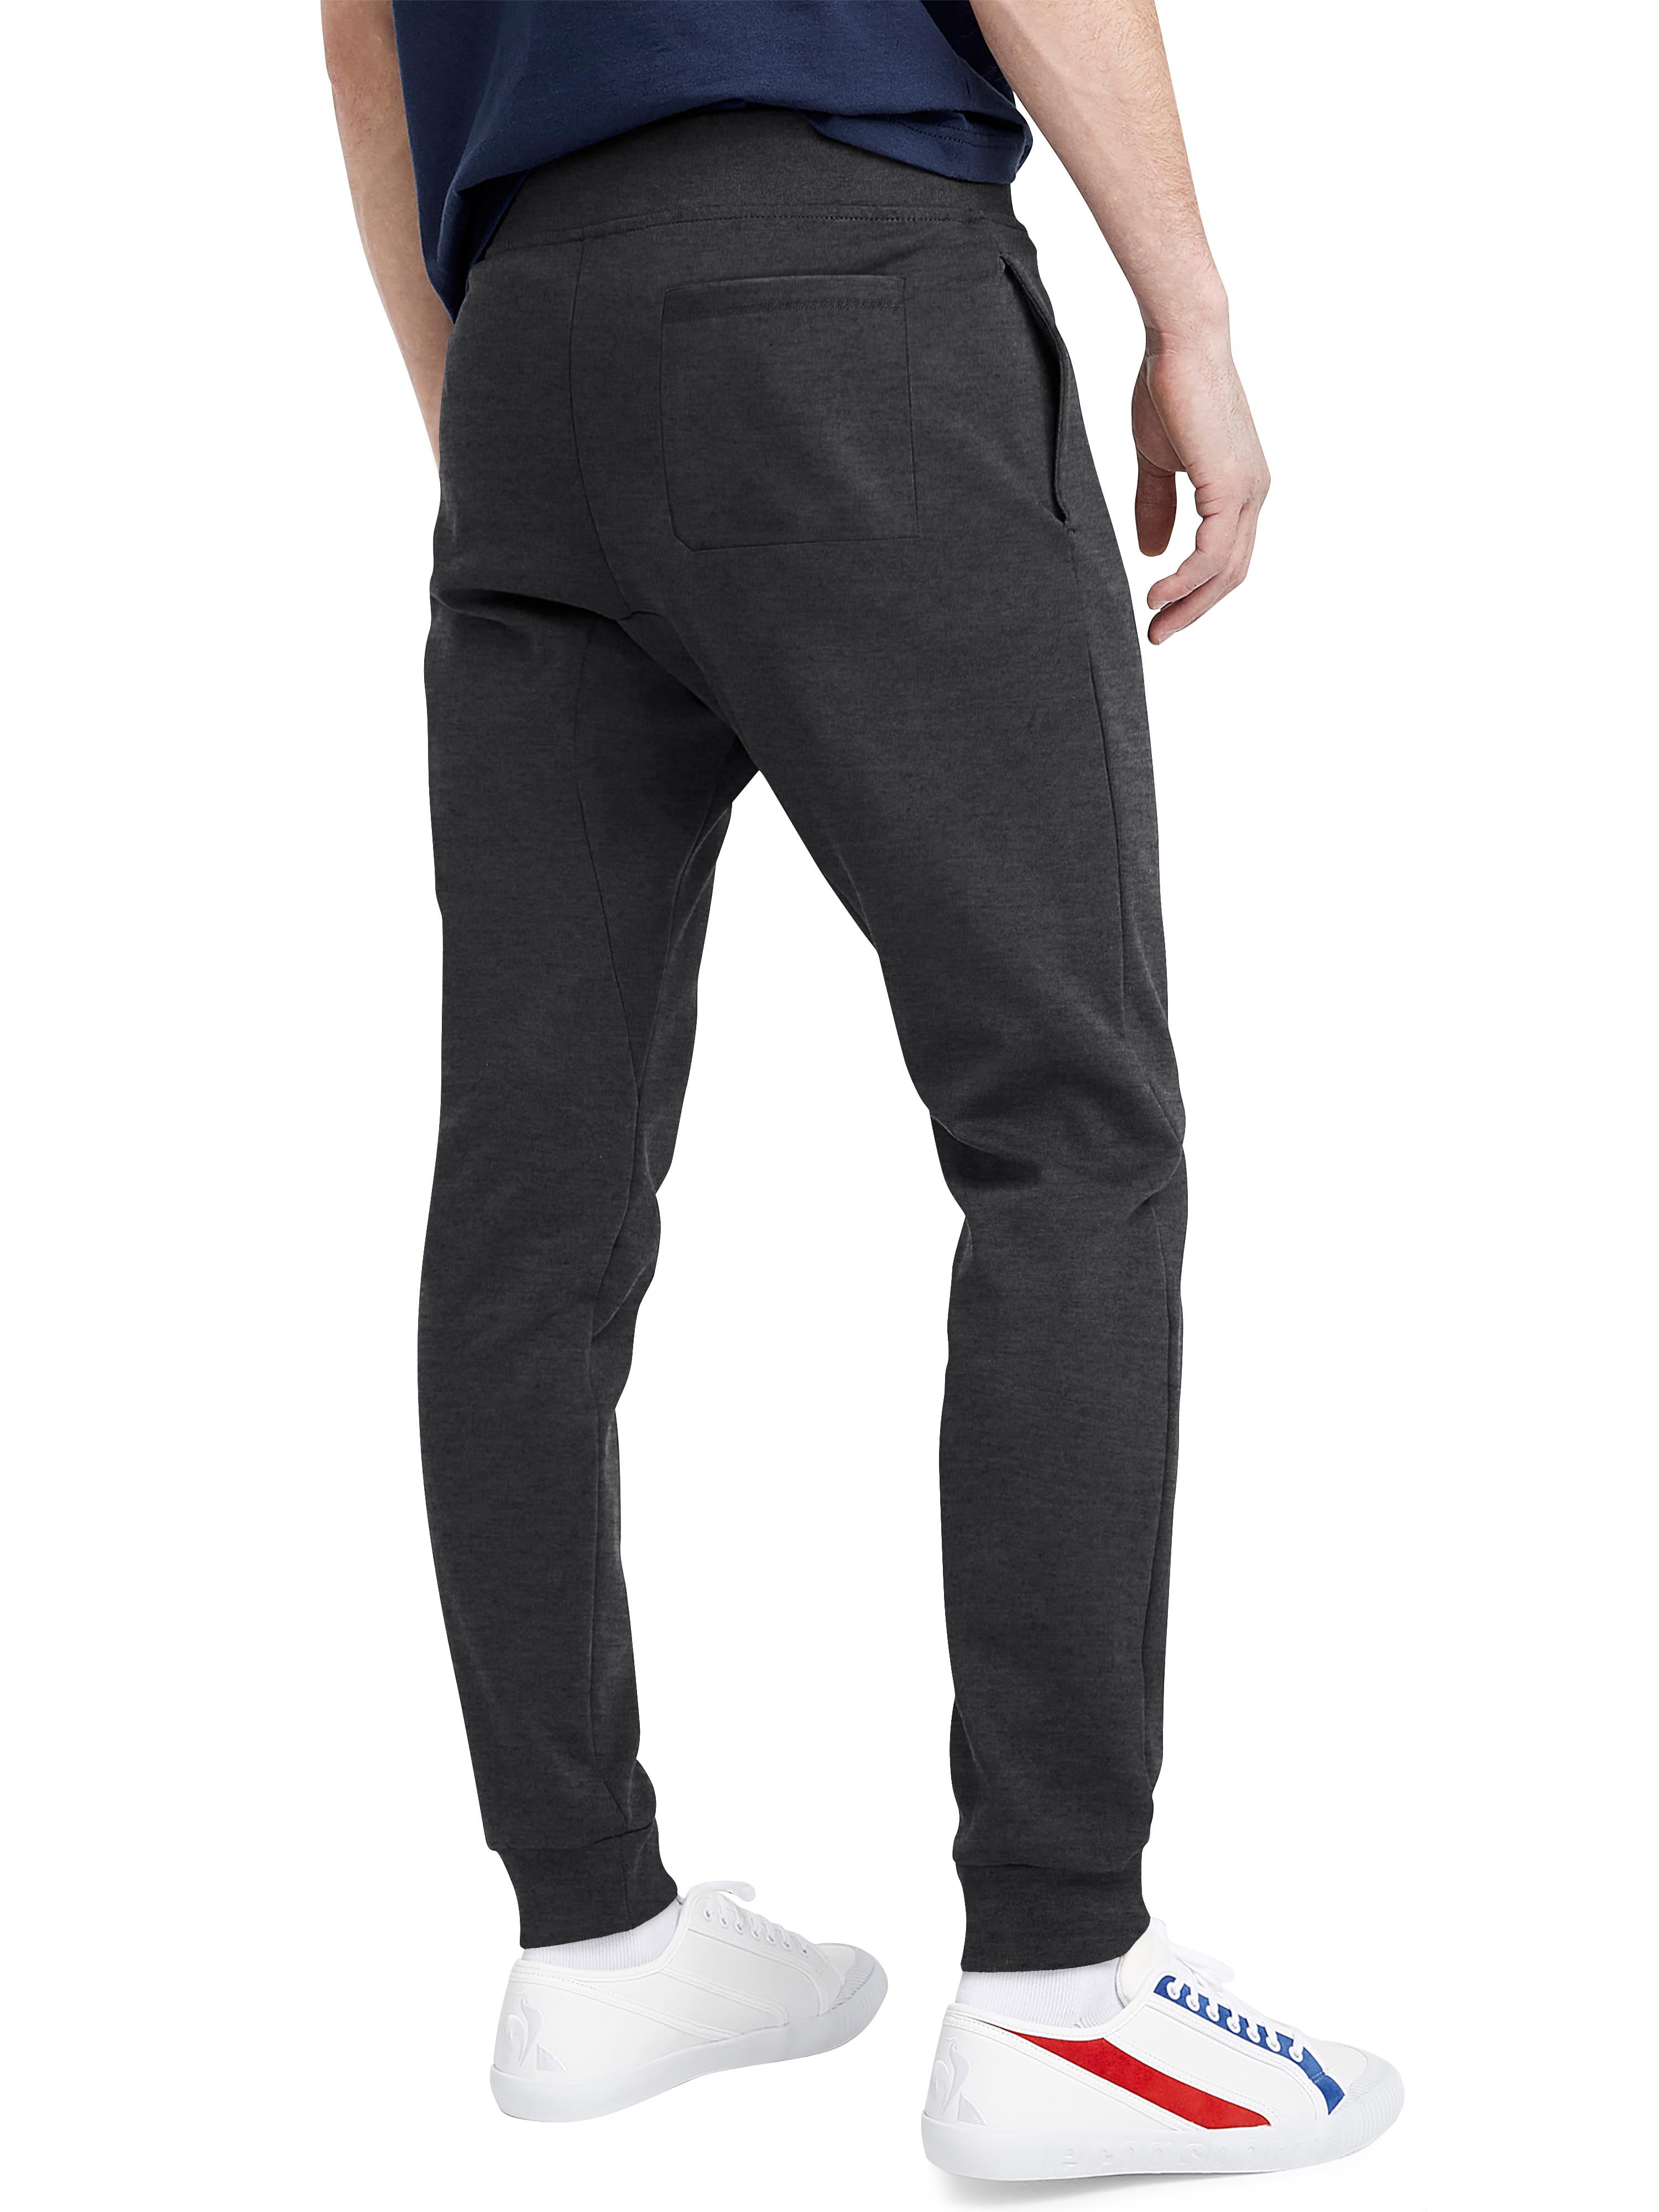 KNQR Men's Performance Lightweight Quick Dry Zip Pockets Slim Fit Stretch  Active Golf Jogger Pants Frost Grey Large